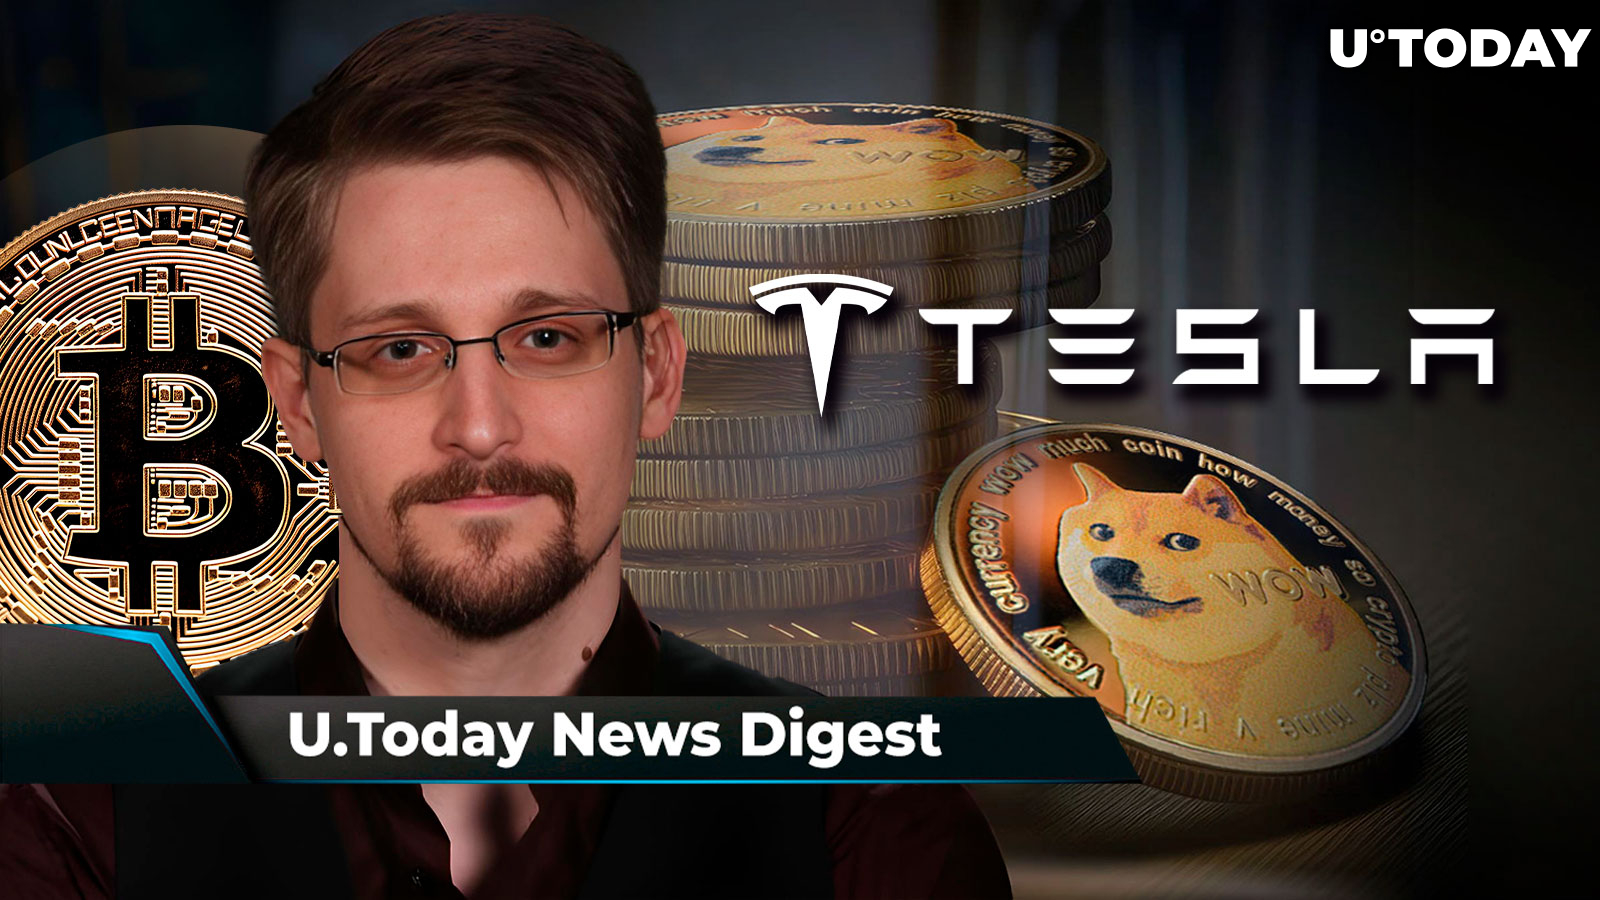 Edward Snowden Issues Crucial Bitcoin Warning, Tesla Officially Adds DOGE as Payment Option But There's a Catch, SHIB Might Be on Verge of Major Breakthrough: Crypto News Digest by U.Today